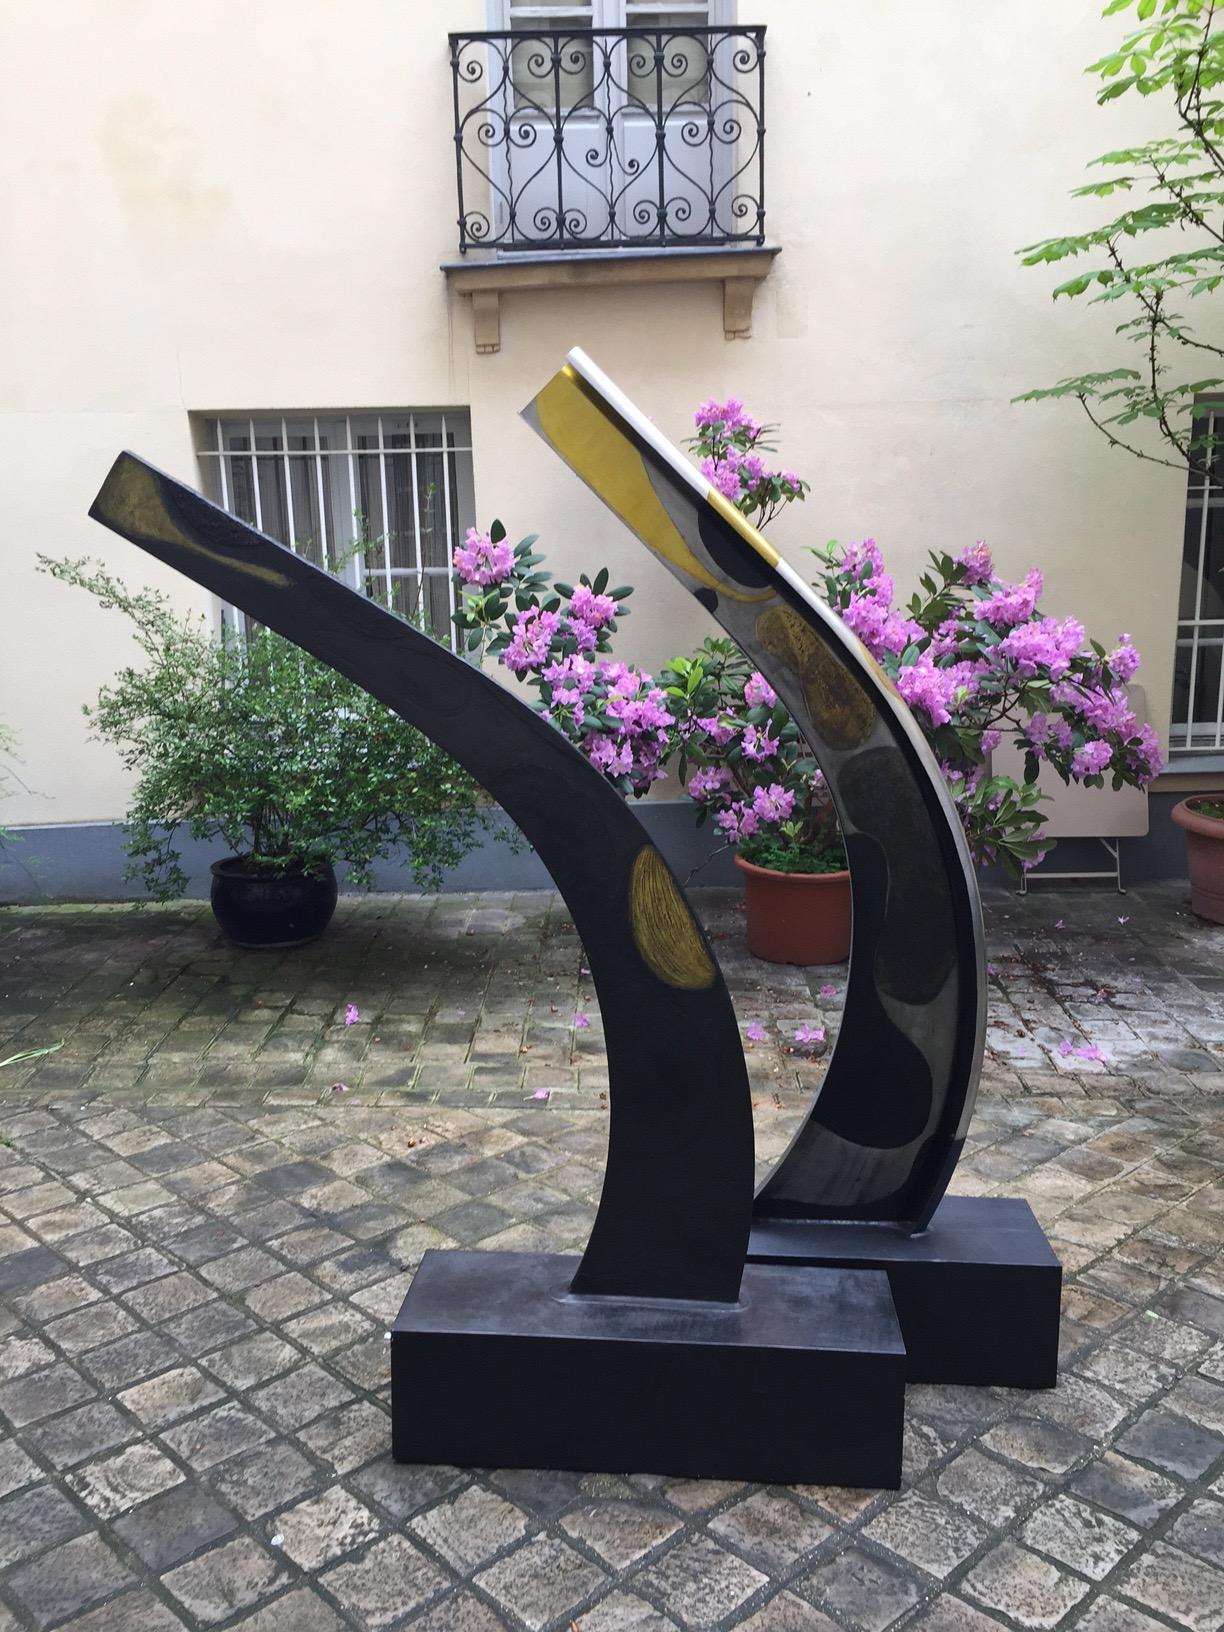 Contemporary Wood and Zinc Sculpture Indoor by Marielle Guégan French Artist 2